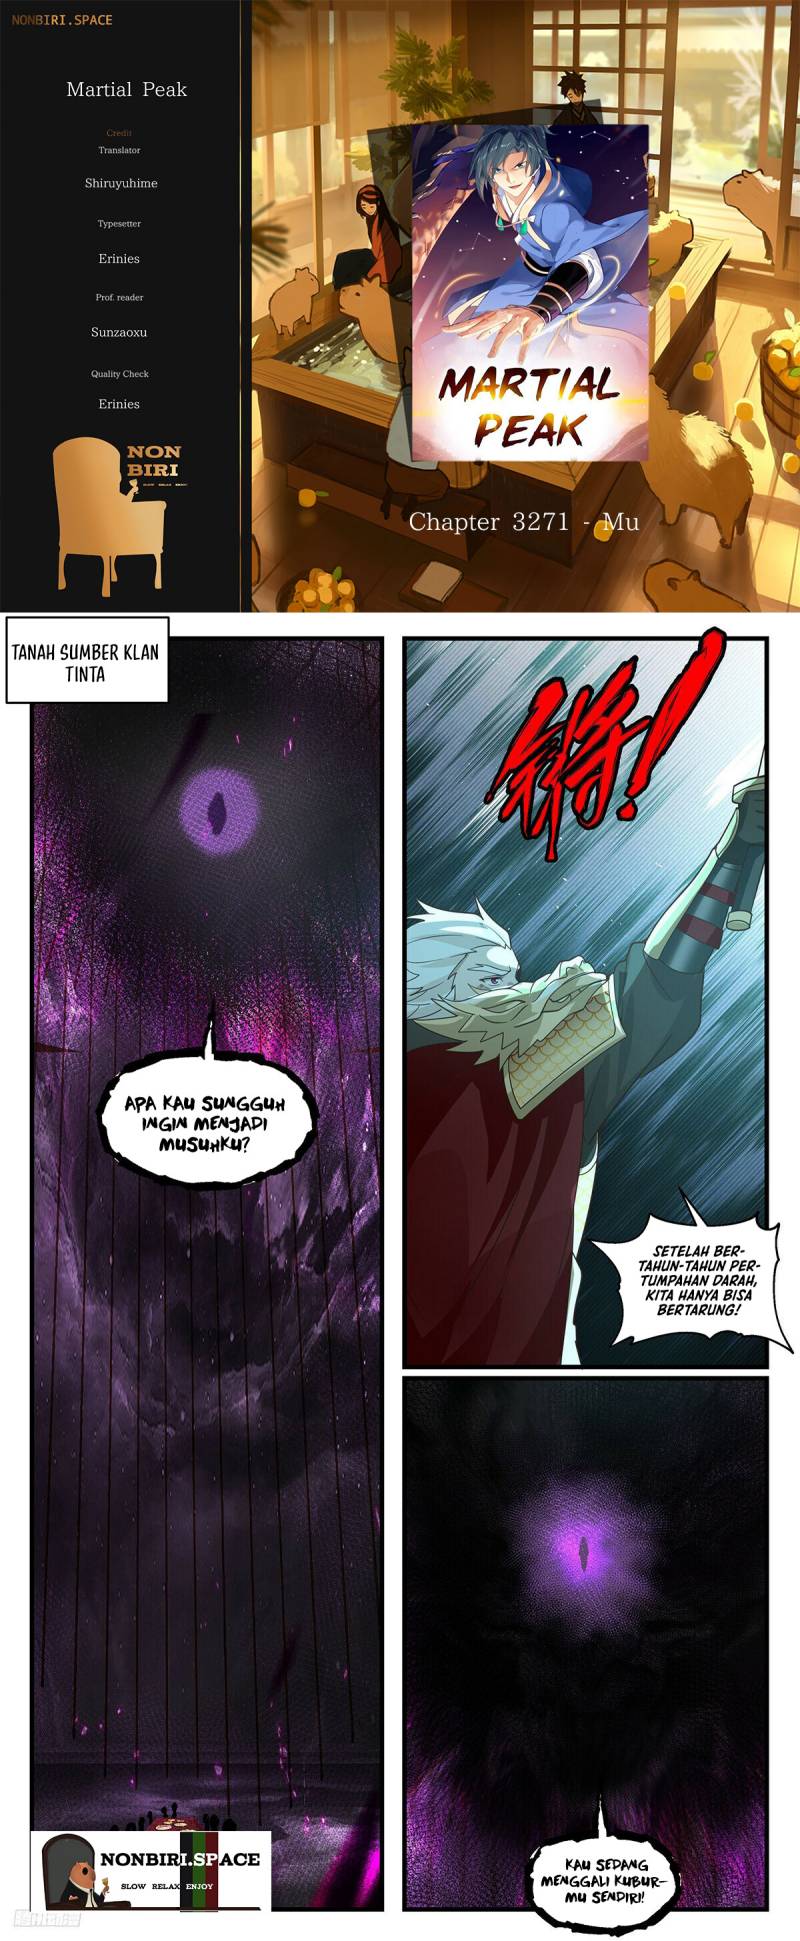 Martial Peak: Chapter 3271 - Page 1